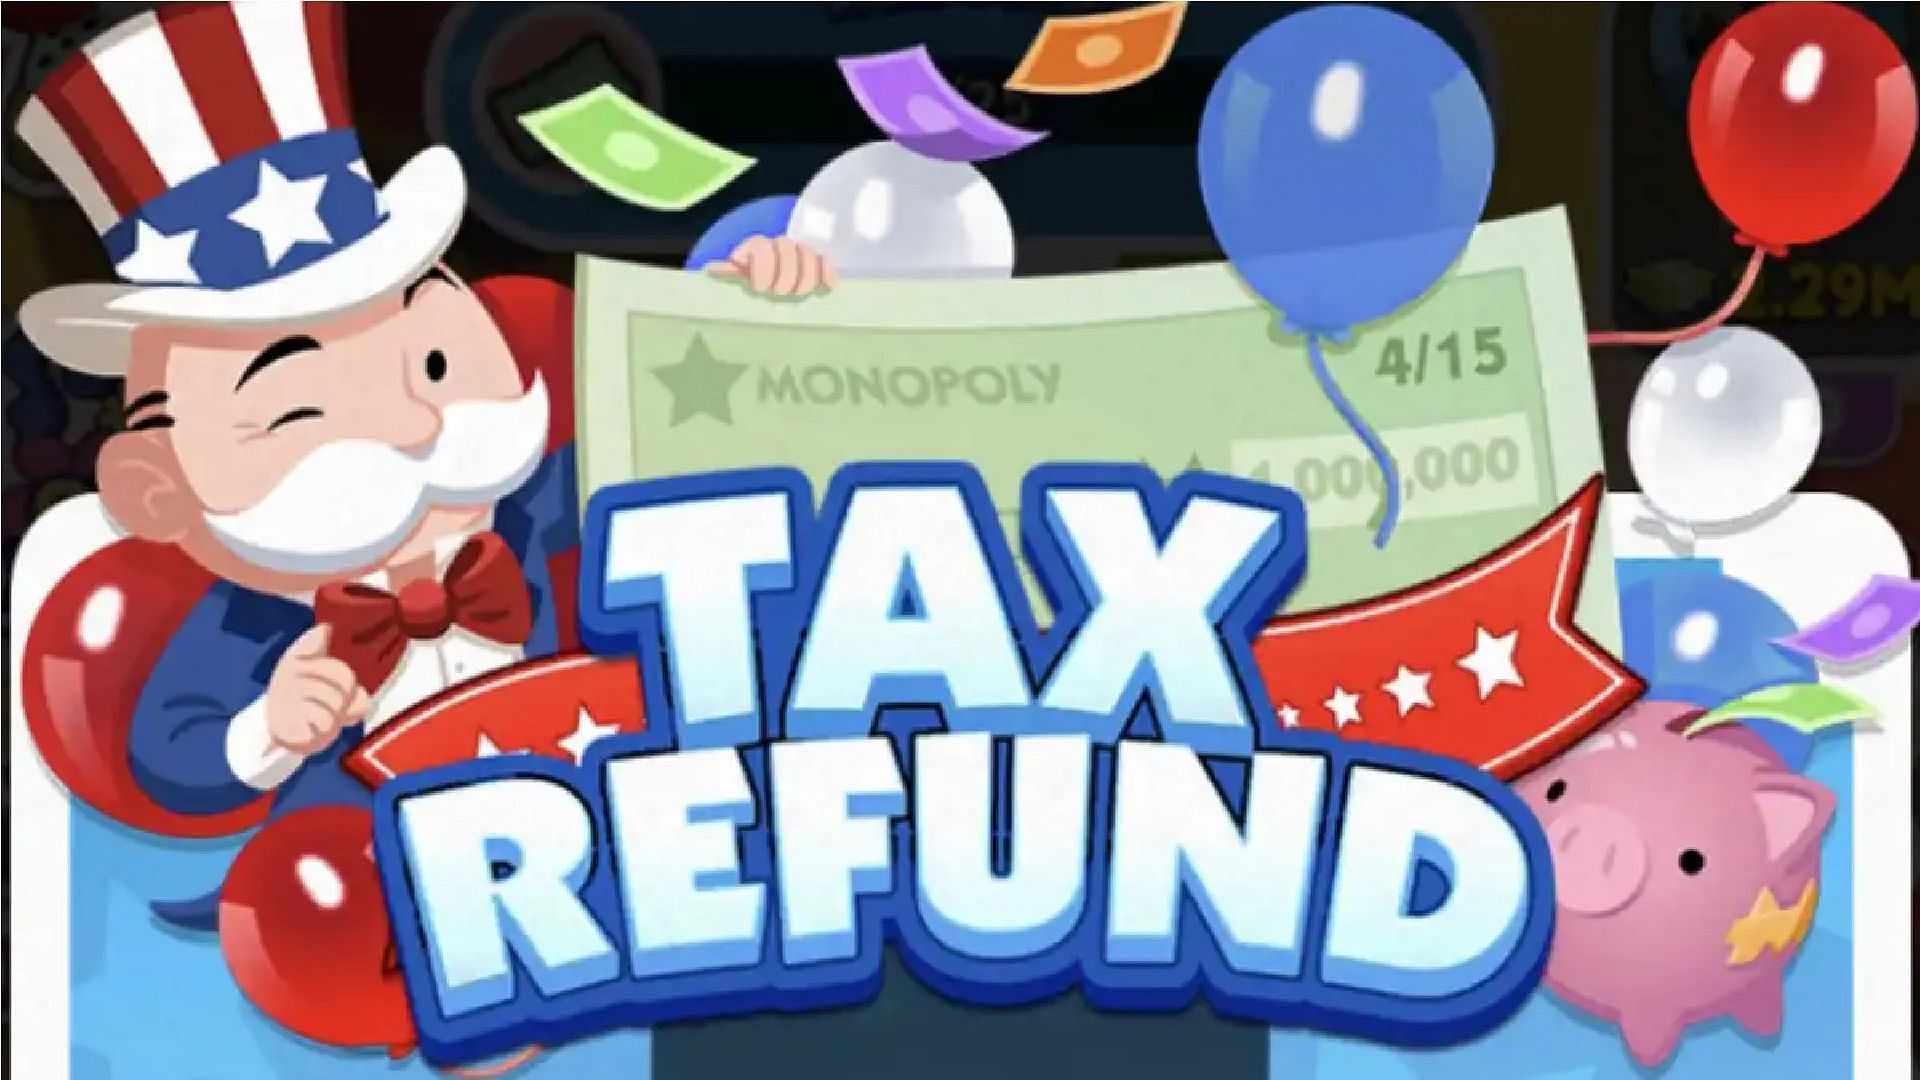 Tax Refunds in Monopoly Go